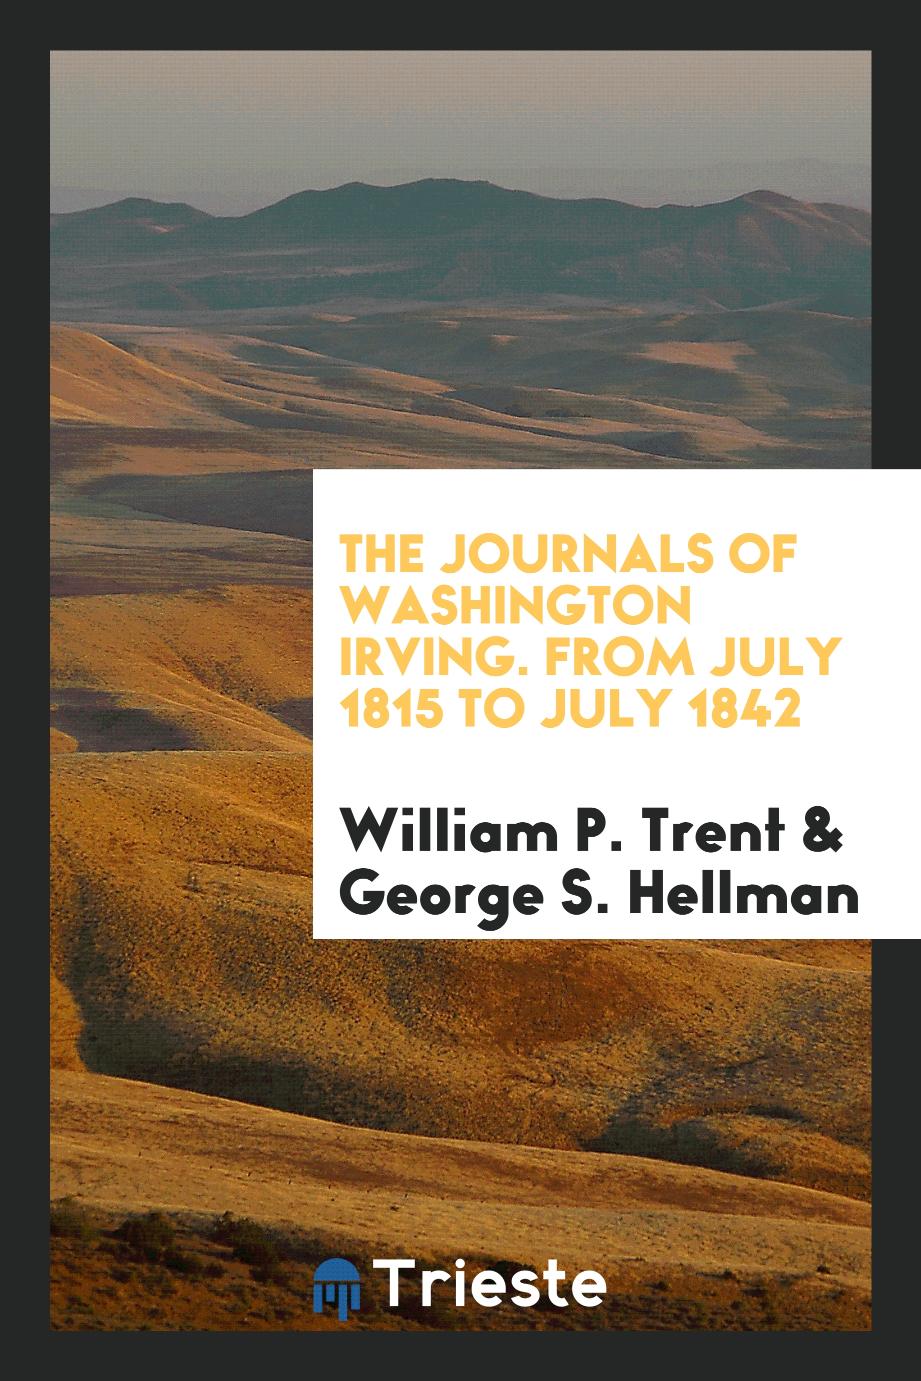 The Journals of Washington Irving. From July 1815 to July 1842